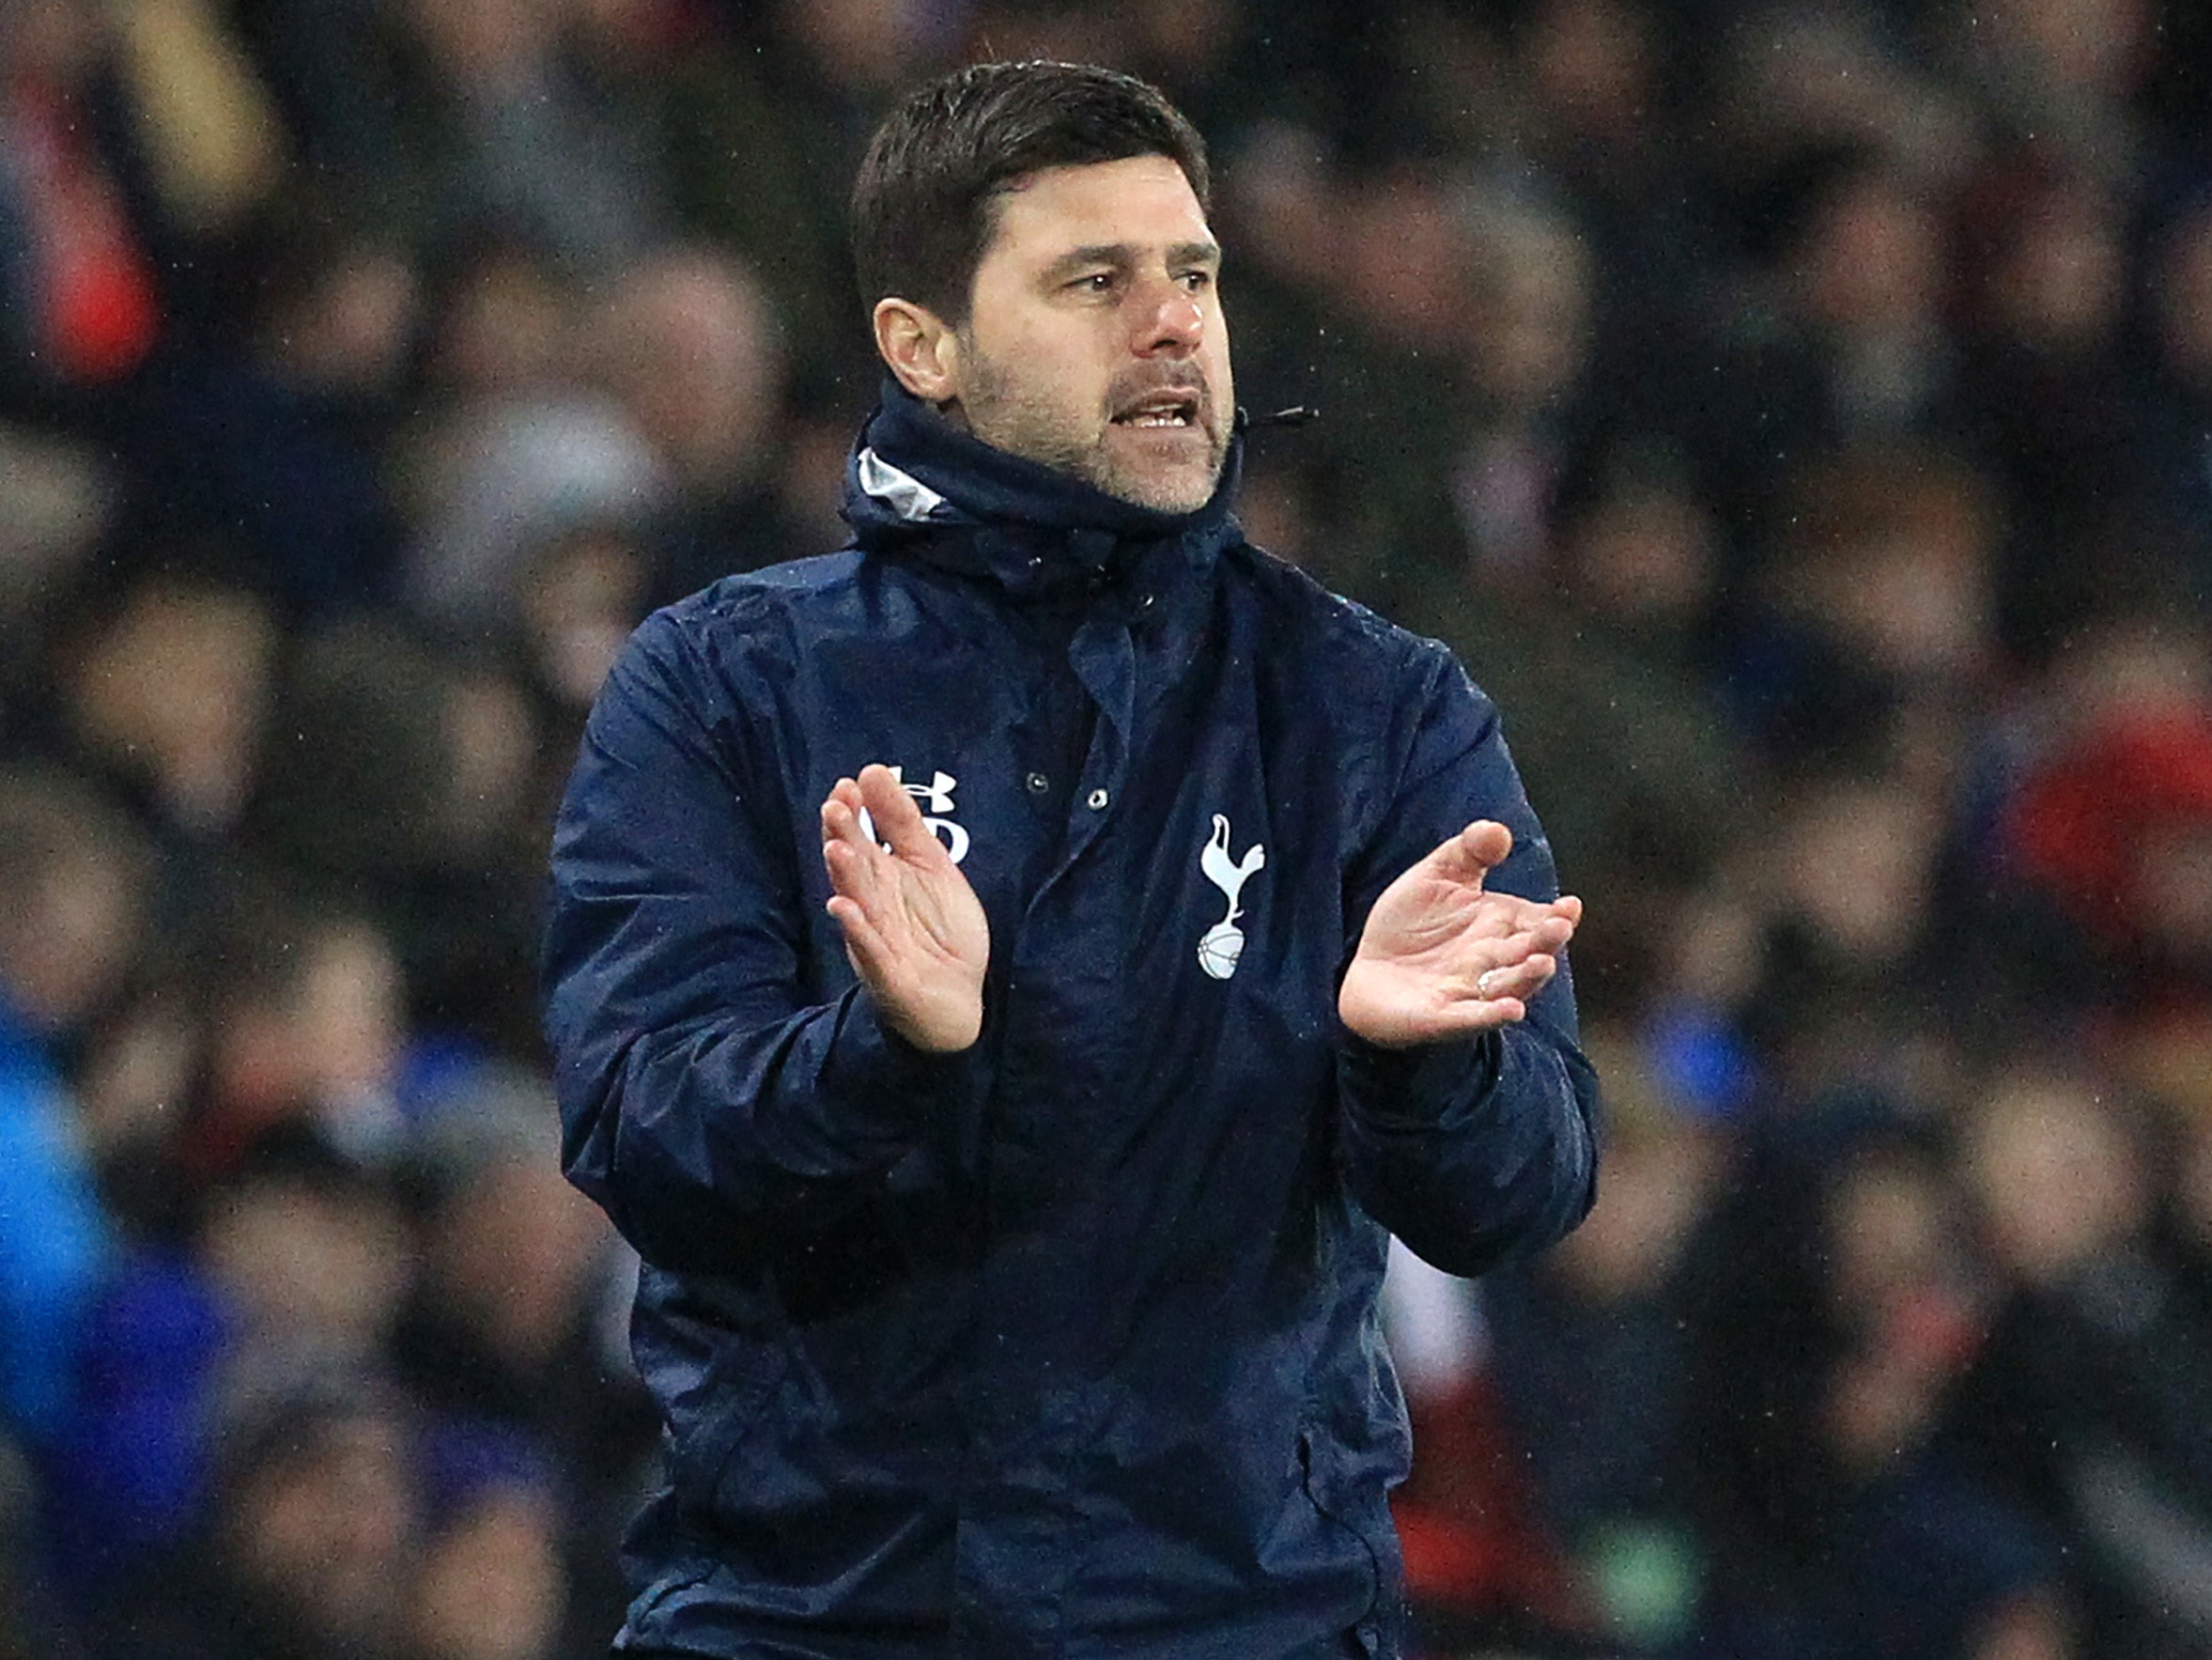 Pochettino doesn't want to drop points like they did at Sunderland in midweek